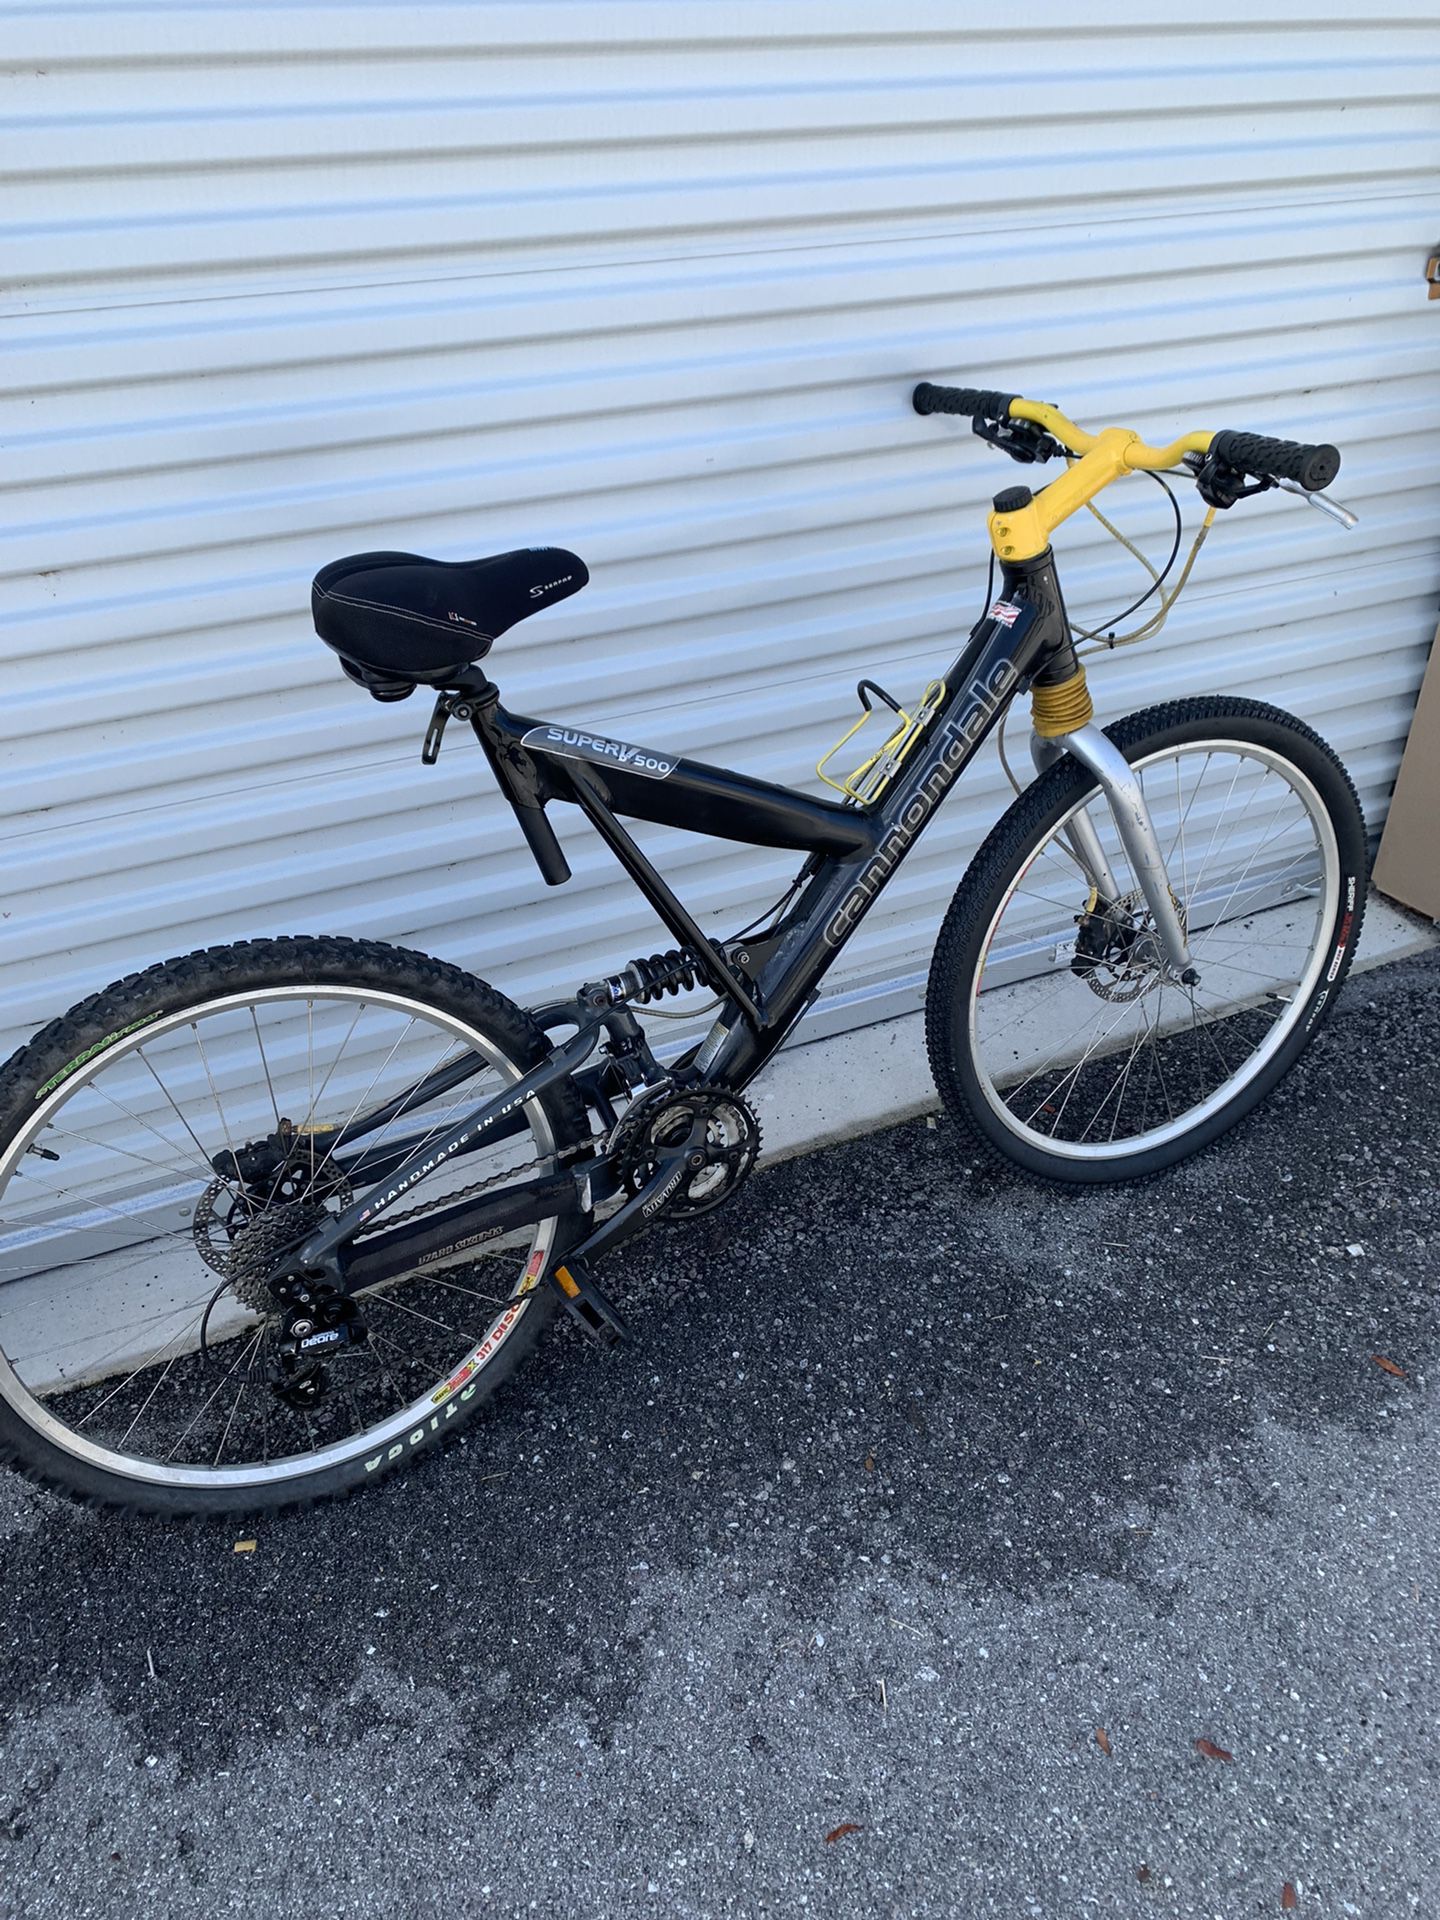  Cannondale Super V 500 Full Suspension Bicycle Limited Black And Yellow Edition!